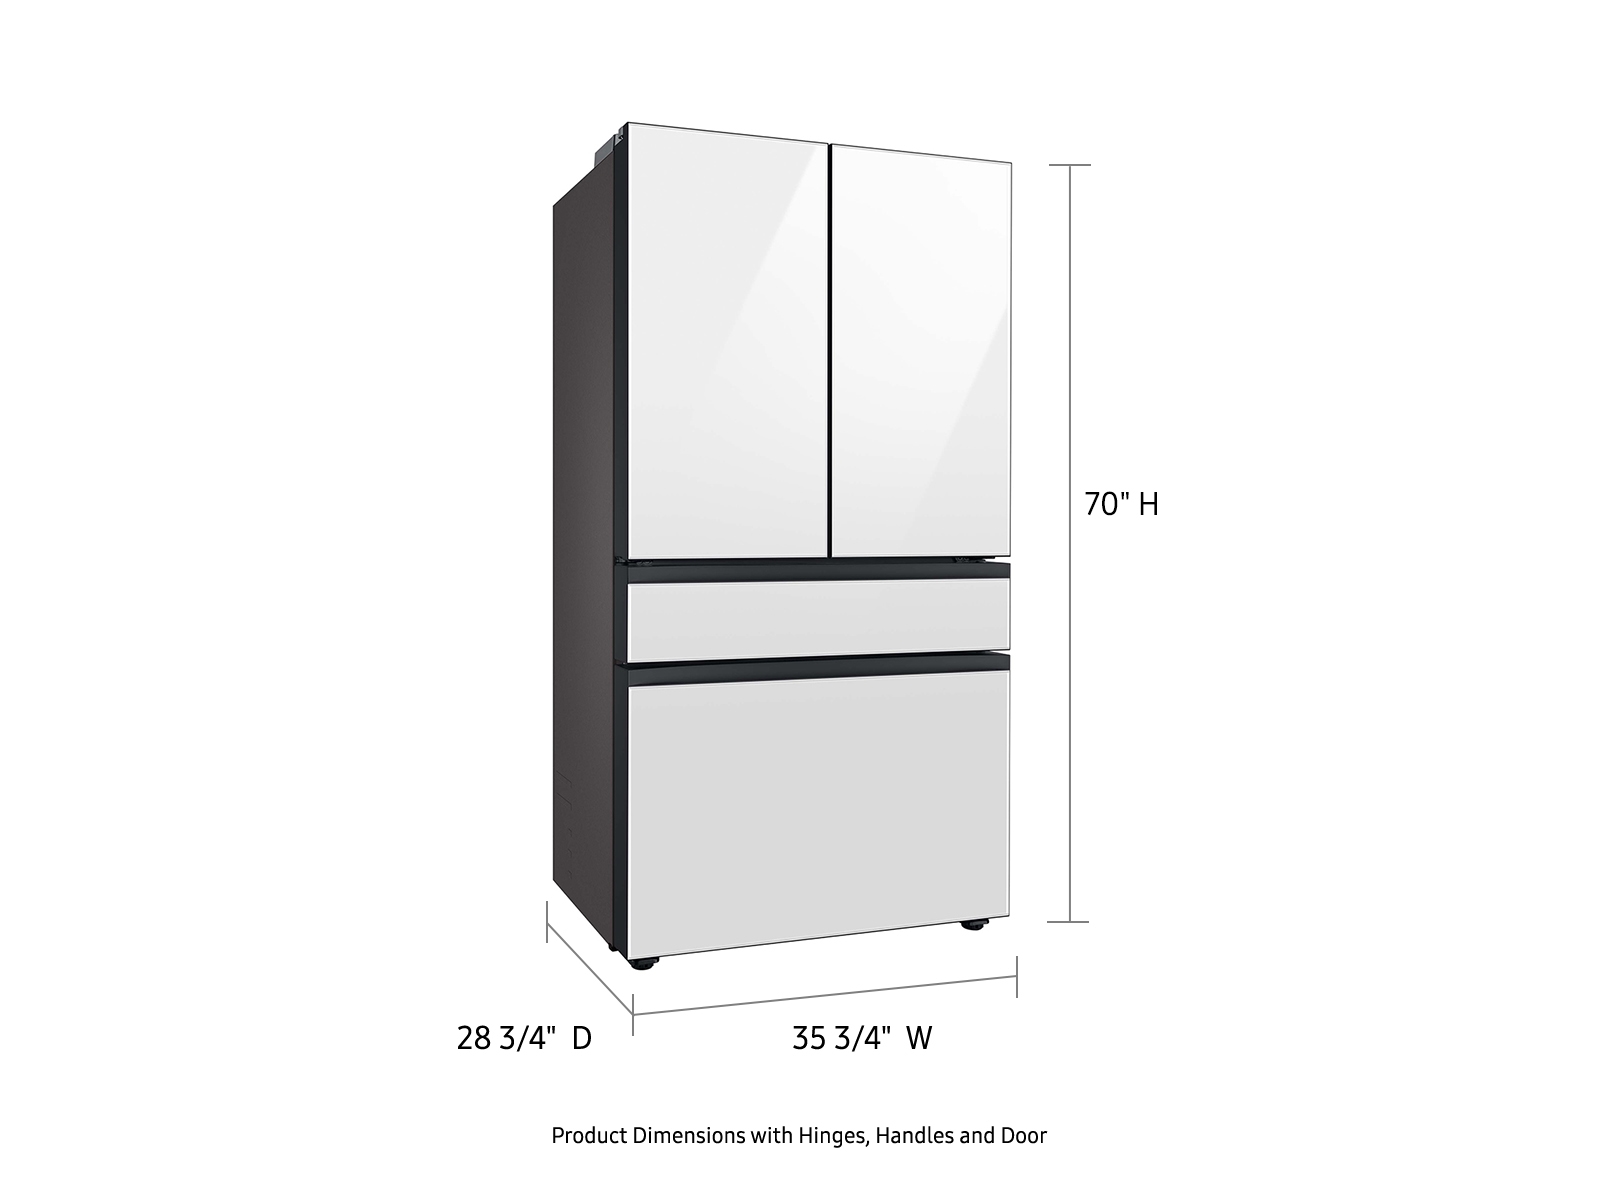 Thumbnail image of Bespoke 4-Door French Door Refrigerator (23 cu. ft.) with AutoFill Water Pitcher in White Glass